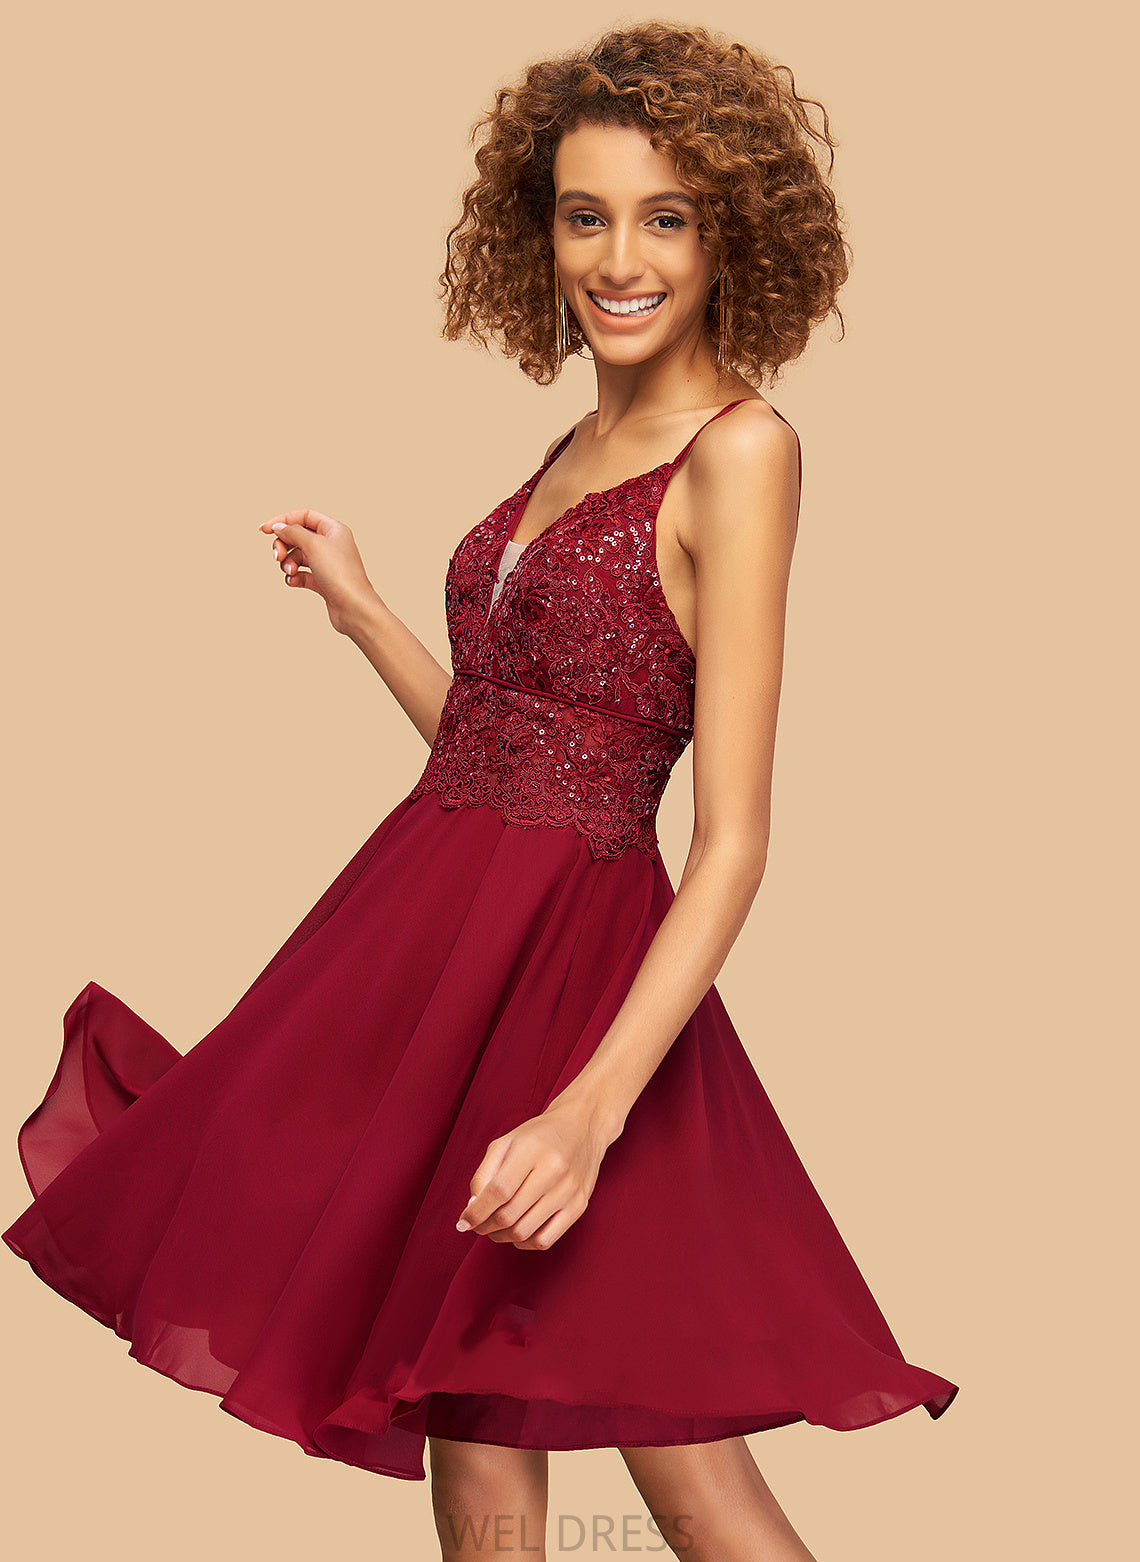 Emily Sequins Dress Homecoming Dresses Homecoming Lace A-Line With Chiffon V-neck Short/Mini